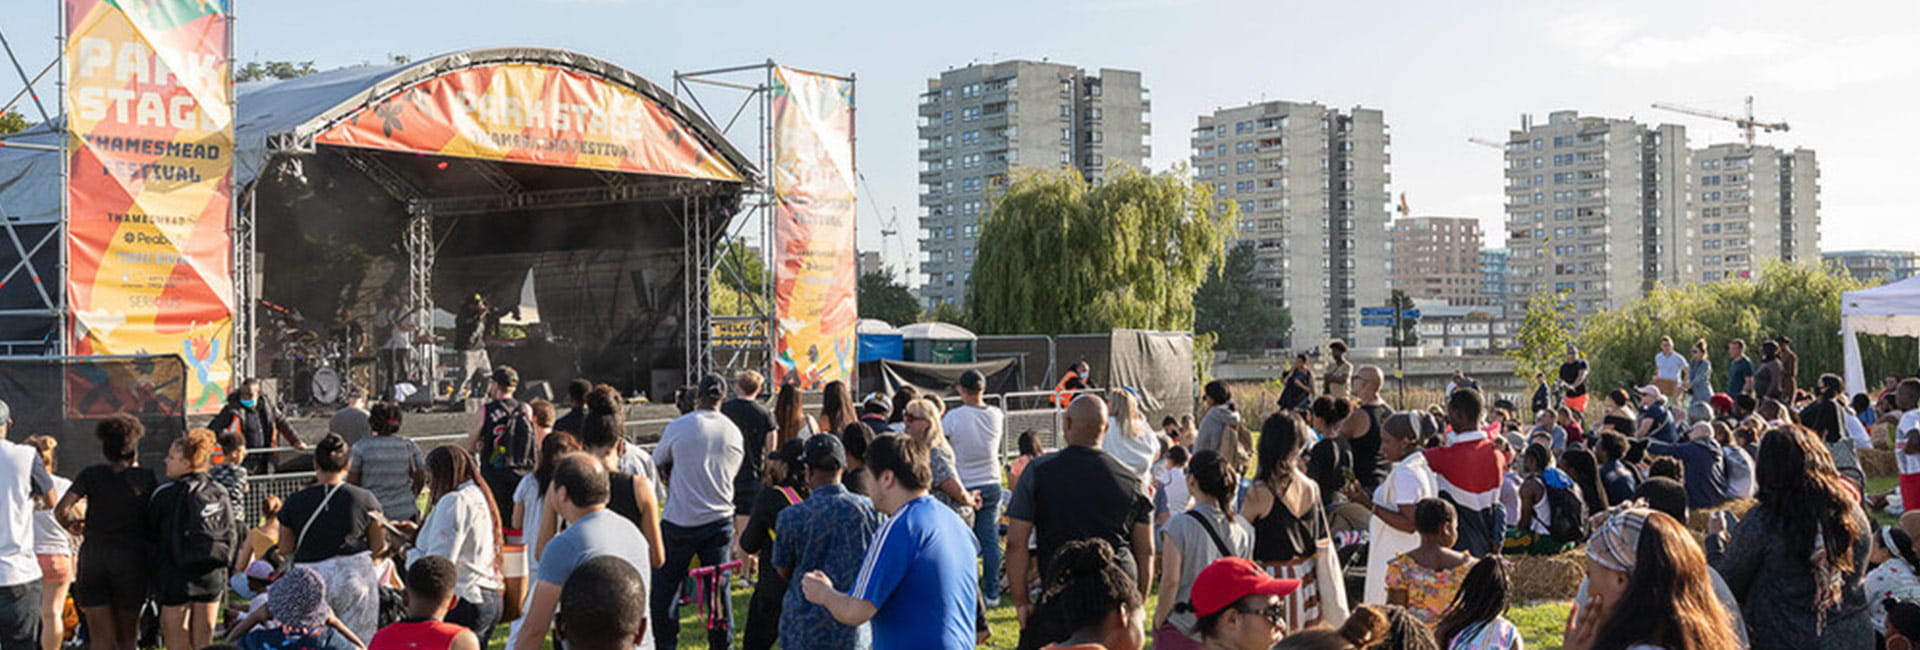 Lombard Square Community, Latest News, West Thamesmead Festival